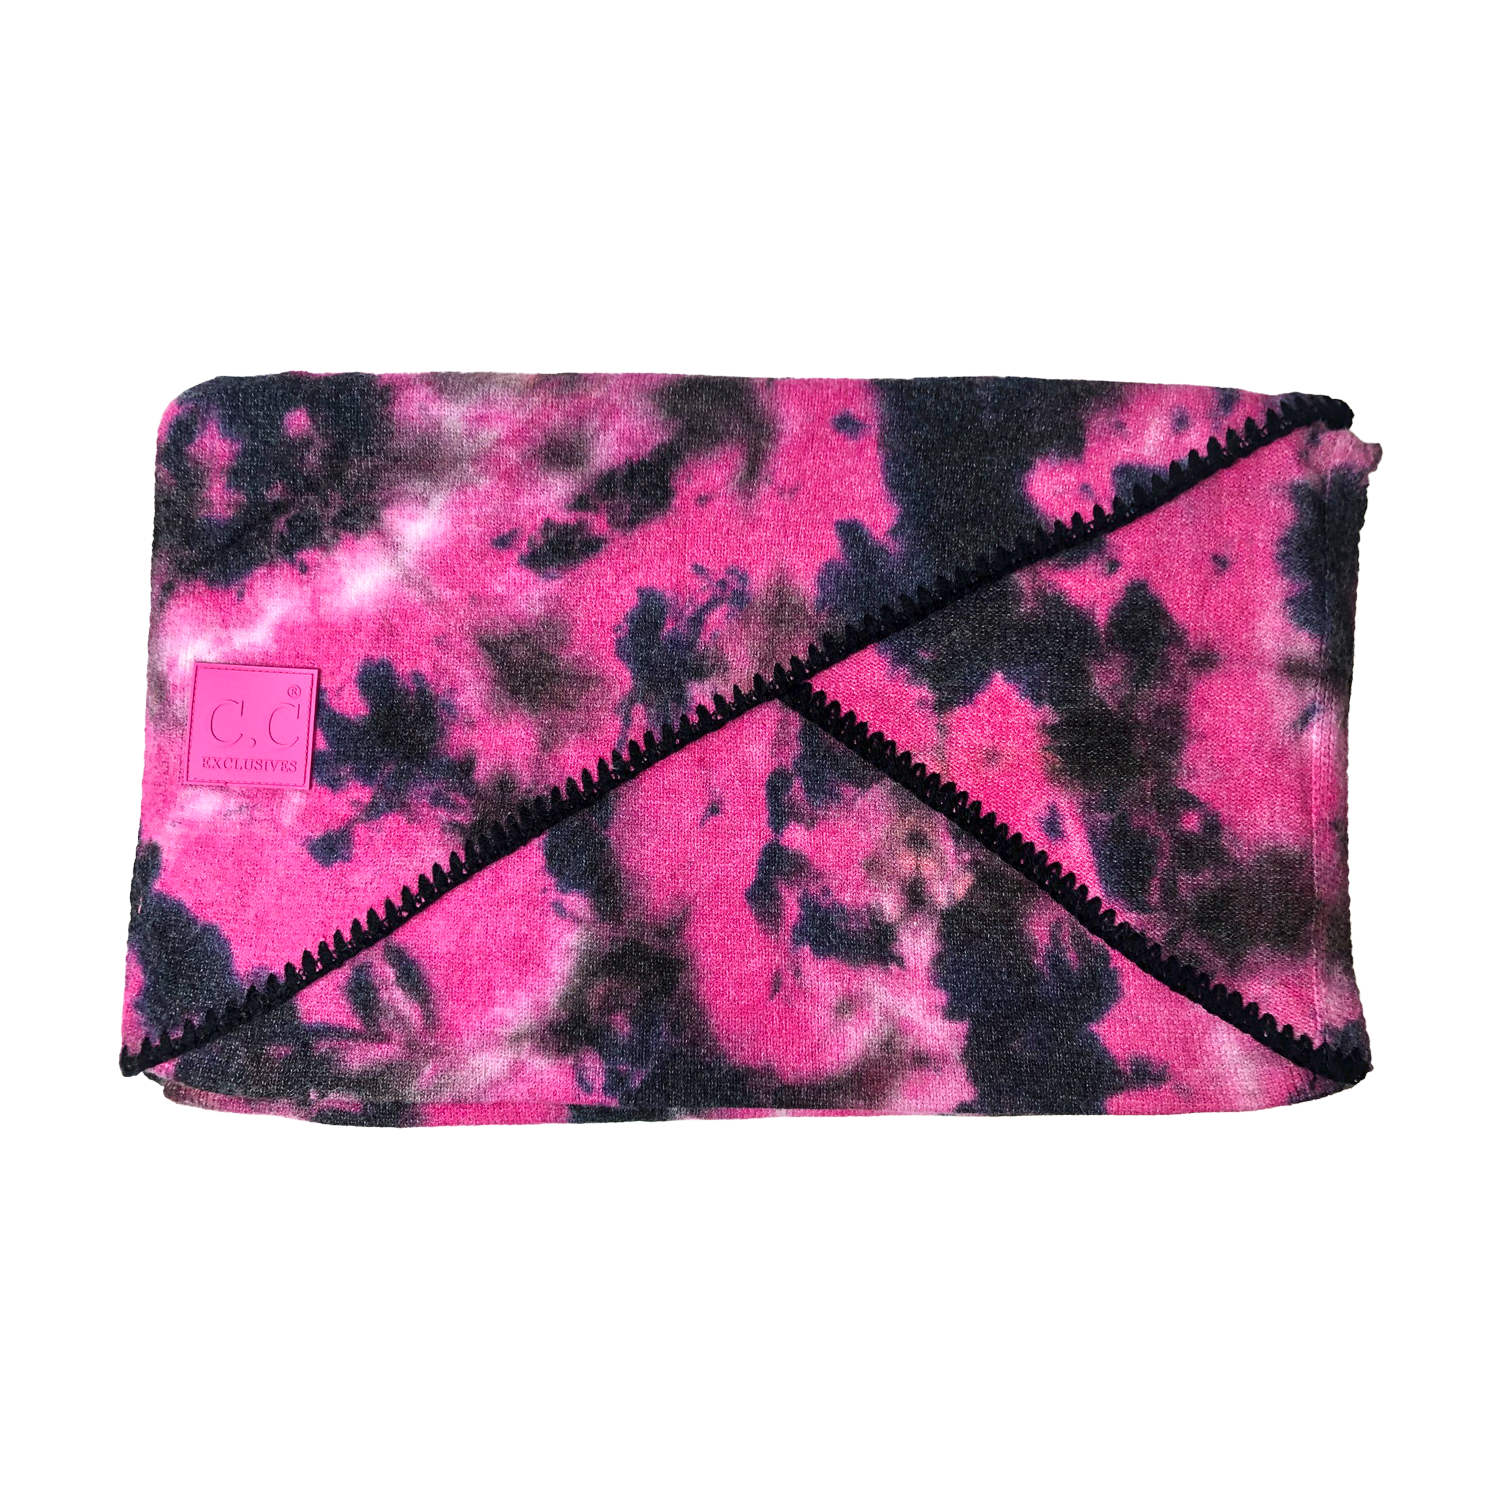 SF-7380 Tie Dye Scarf with C.C Rubber Patch - Black/Hot Pink